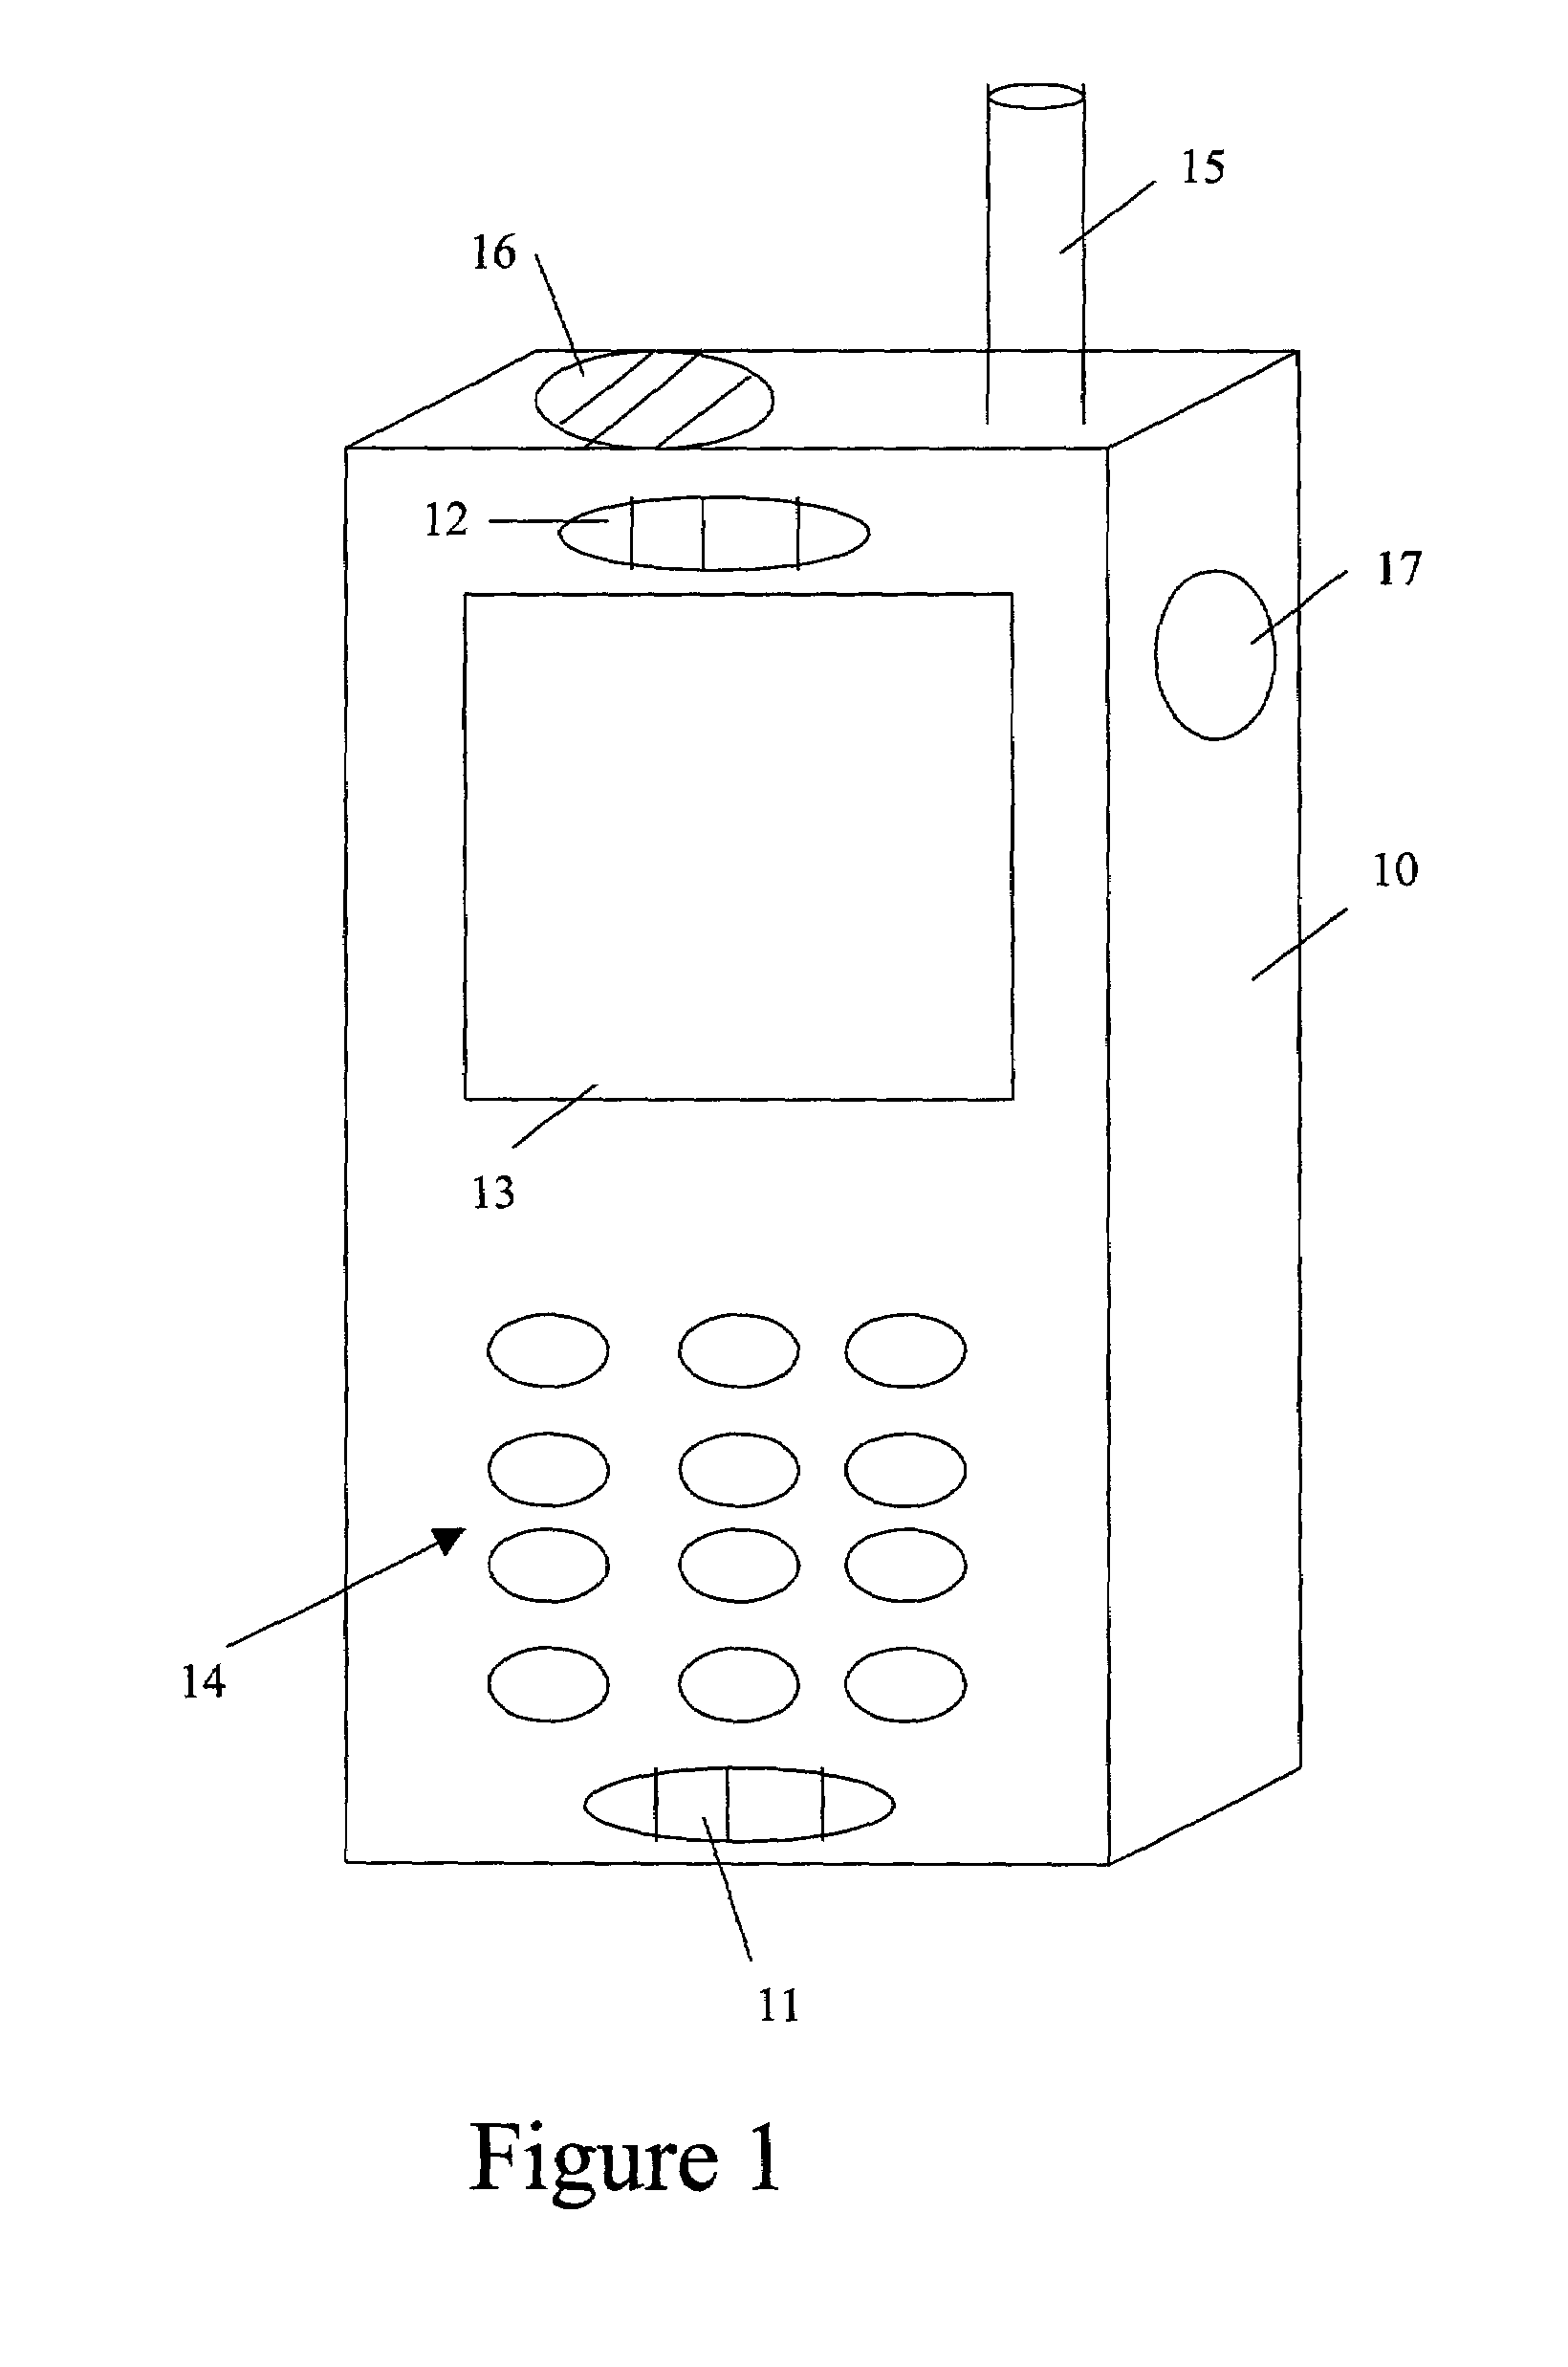 Speaker volume control for voice communication device